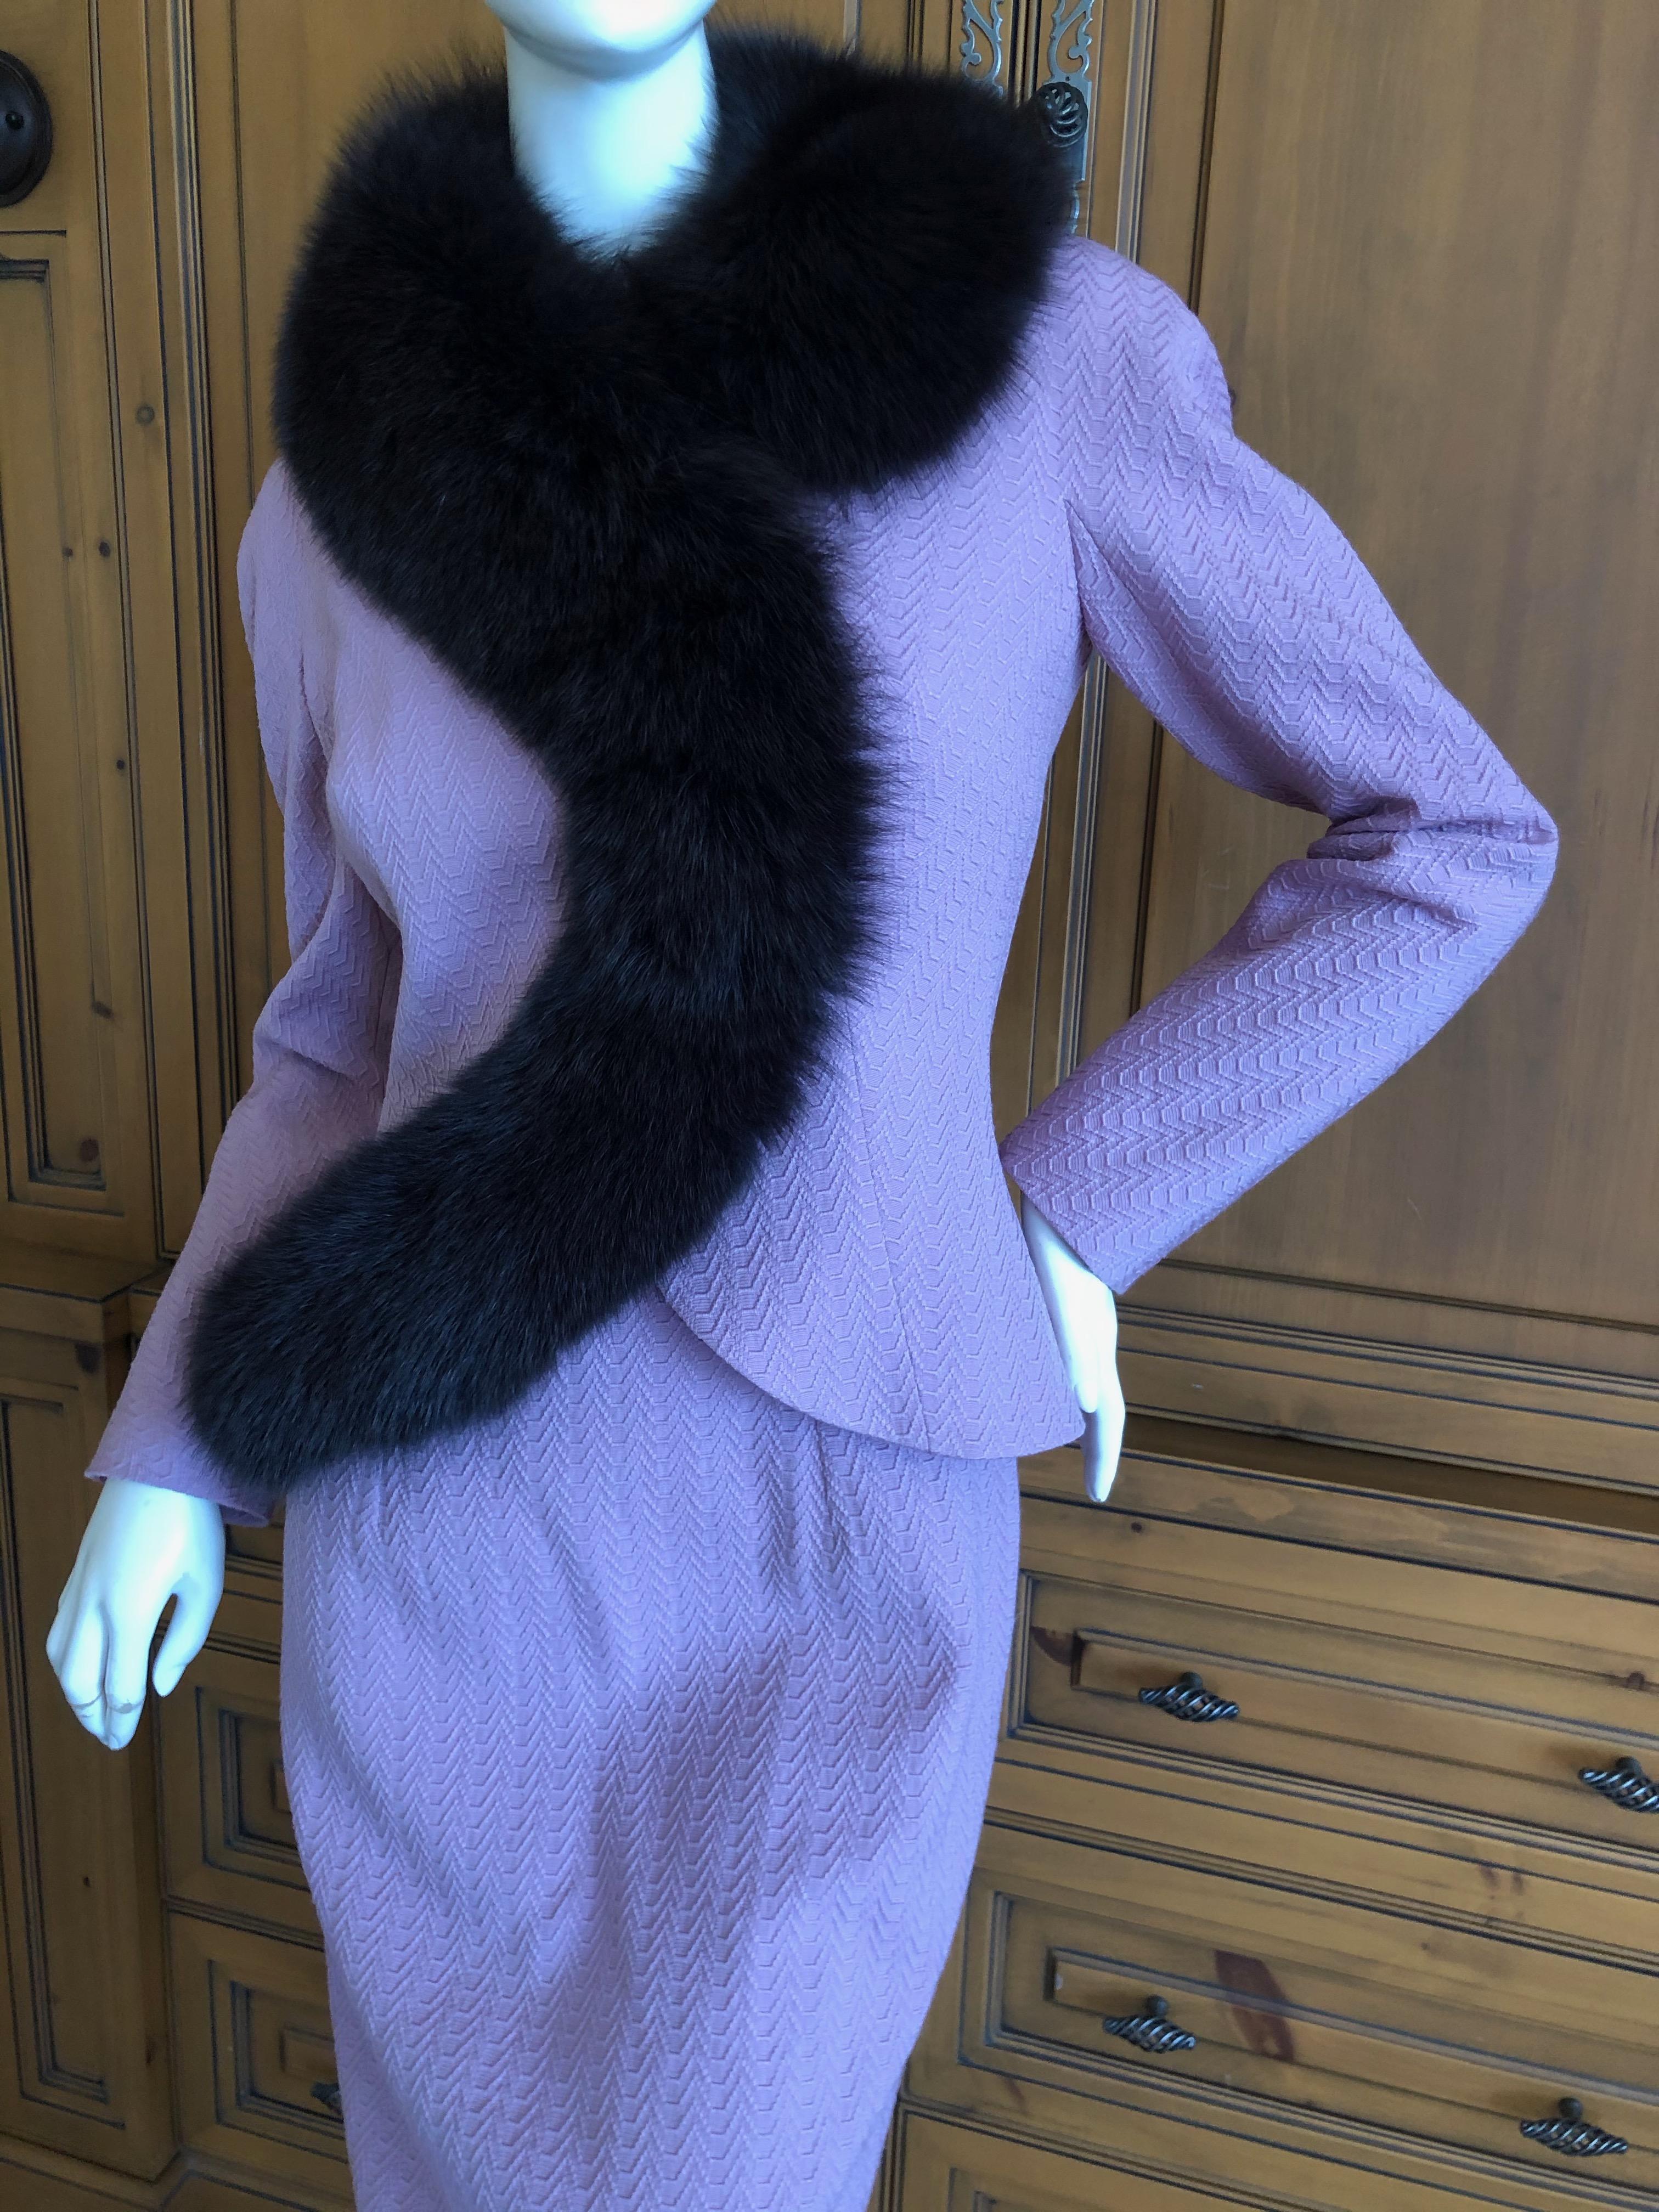  Christian Dior AW '97 by Galliano Vintage Lavender Dress w Fox Fur Trim Jacket.
Sleeveless shift dress with jacket.
This is so pretty, the color of lilac's.
Lined in silk .
 Size 36, but runs large.
Dress;
Bust 36